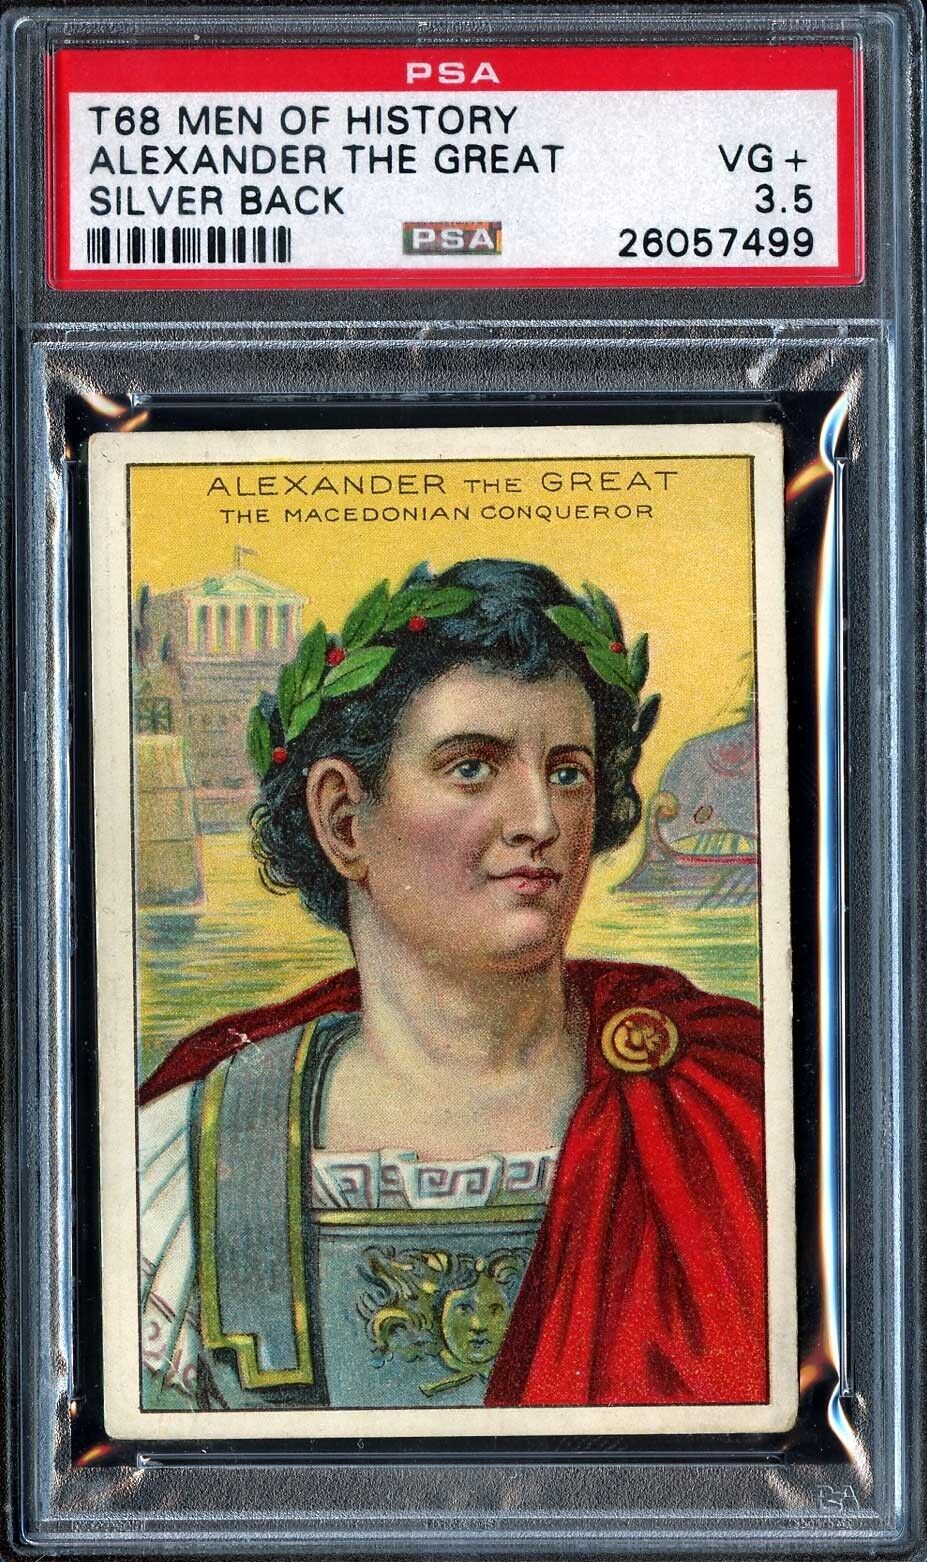 1911 T68 SILVERBACK MEN OF HISTORY ALEXANDER THE GREAT  PSA 3.5 VG+  ONE OF ONE